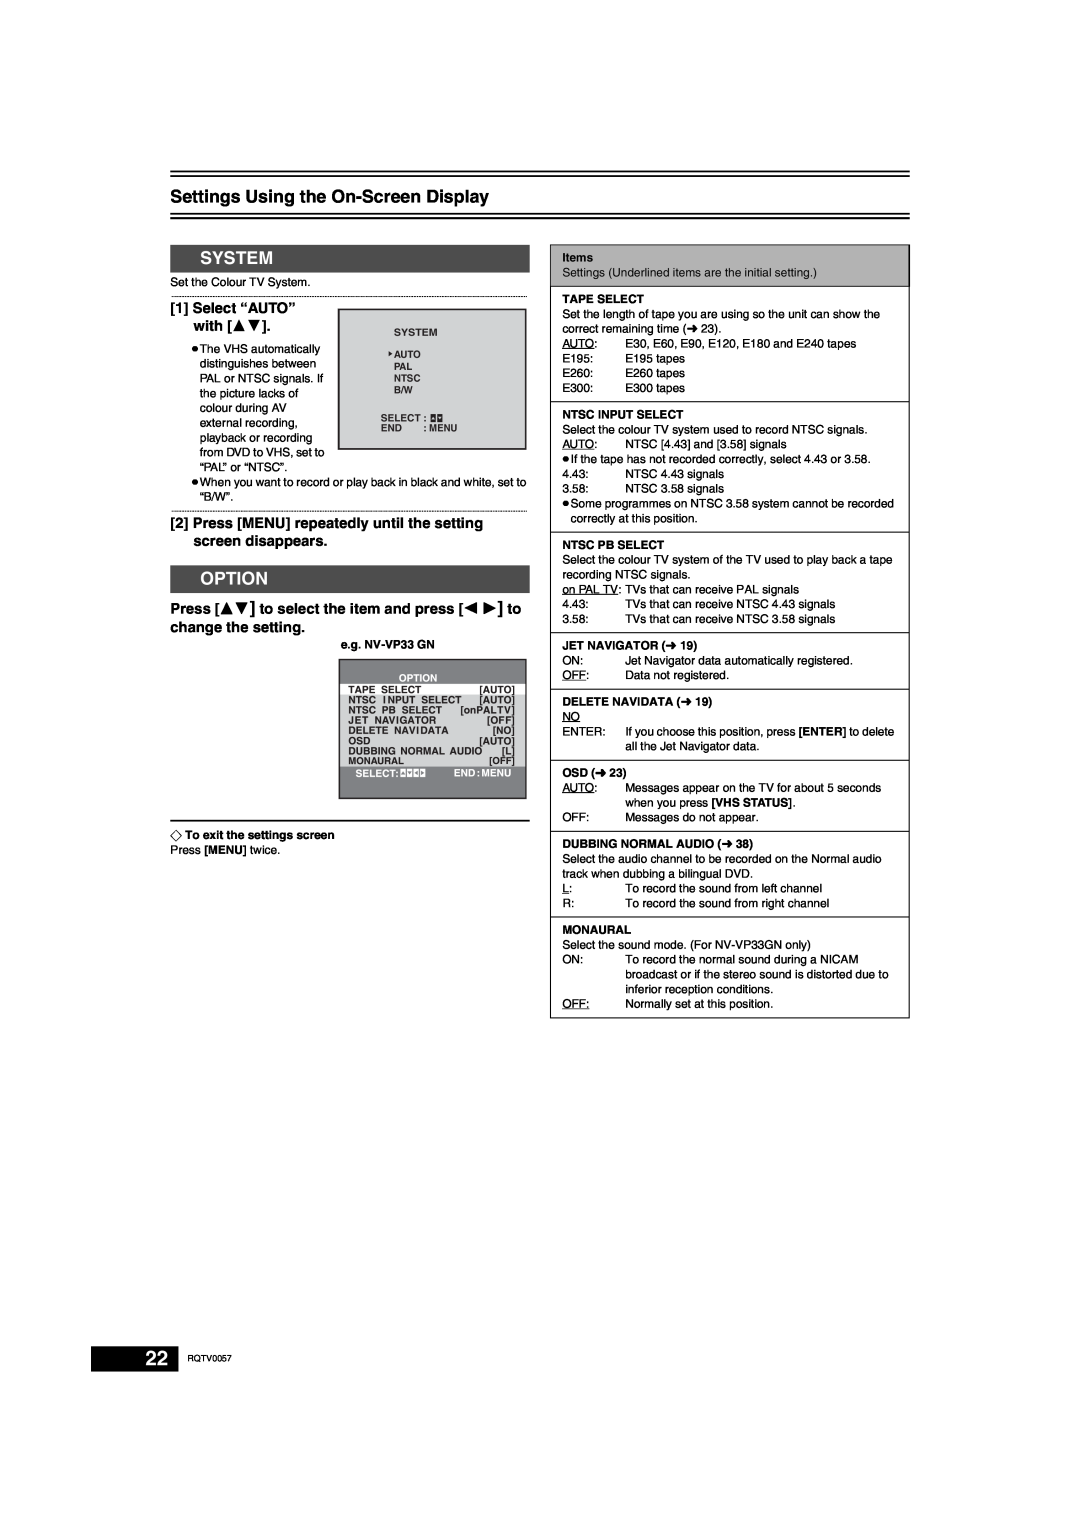 Panasonic NV-VP33 Series operating instructions Settings Using the On-Screen Display, System, Option, Select “AUTO” with 